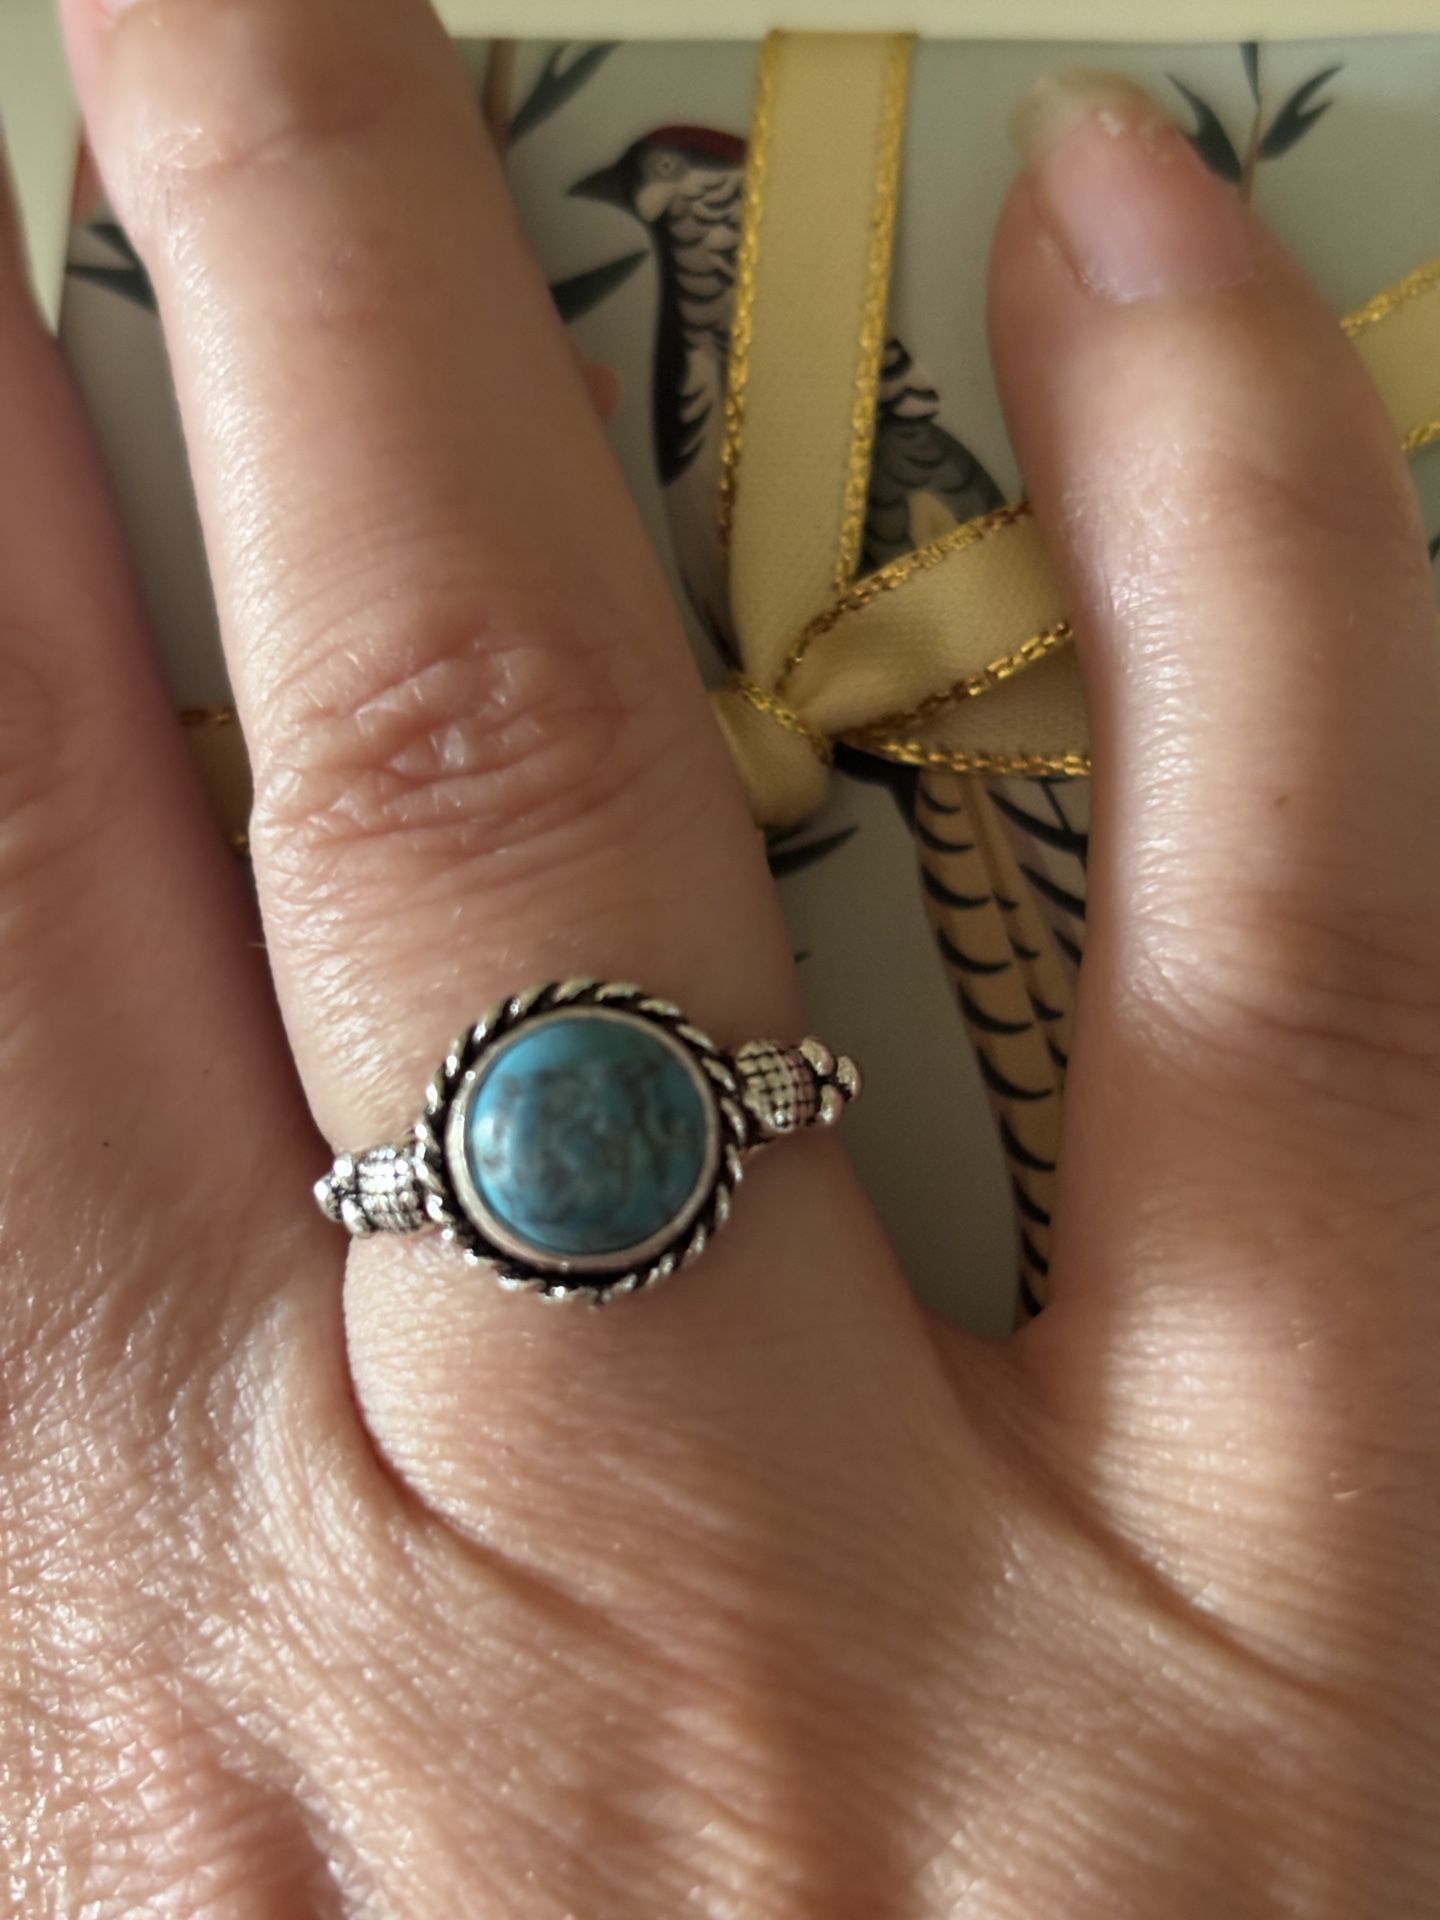 Sterling Silver Turquoise Gemstone Vintage Style Ring 7